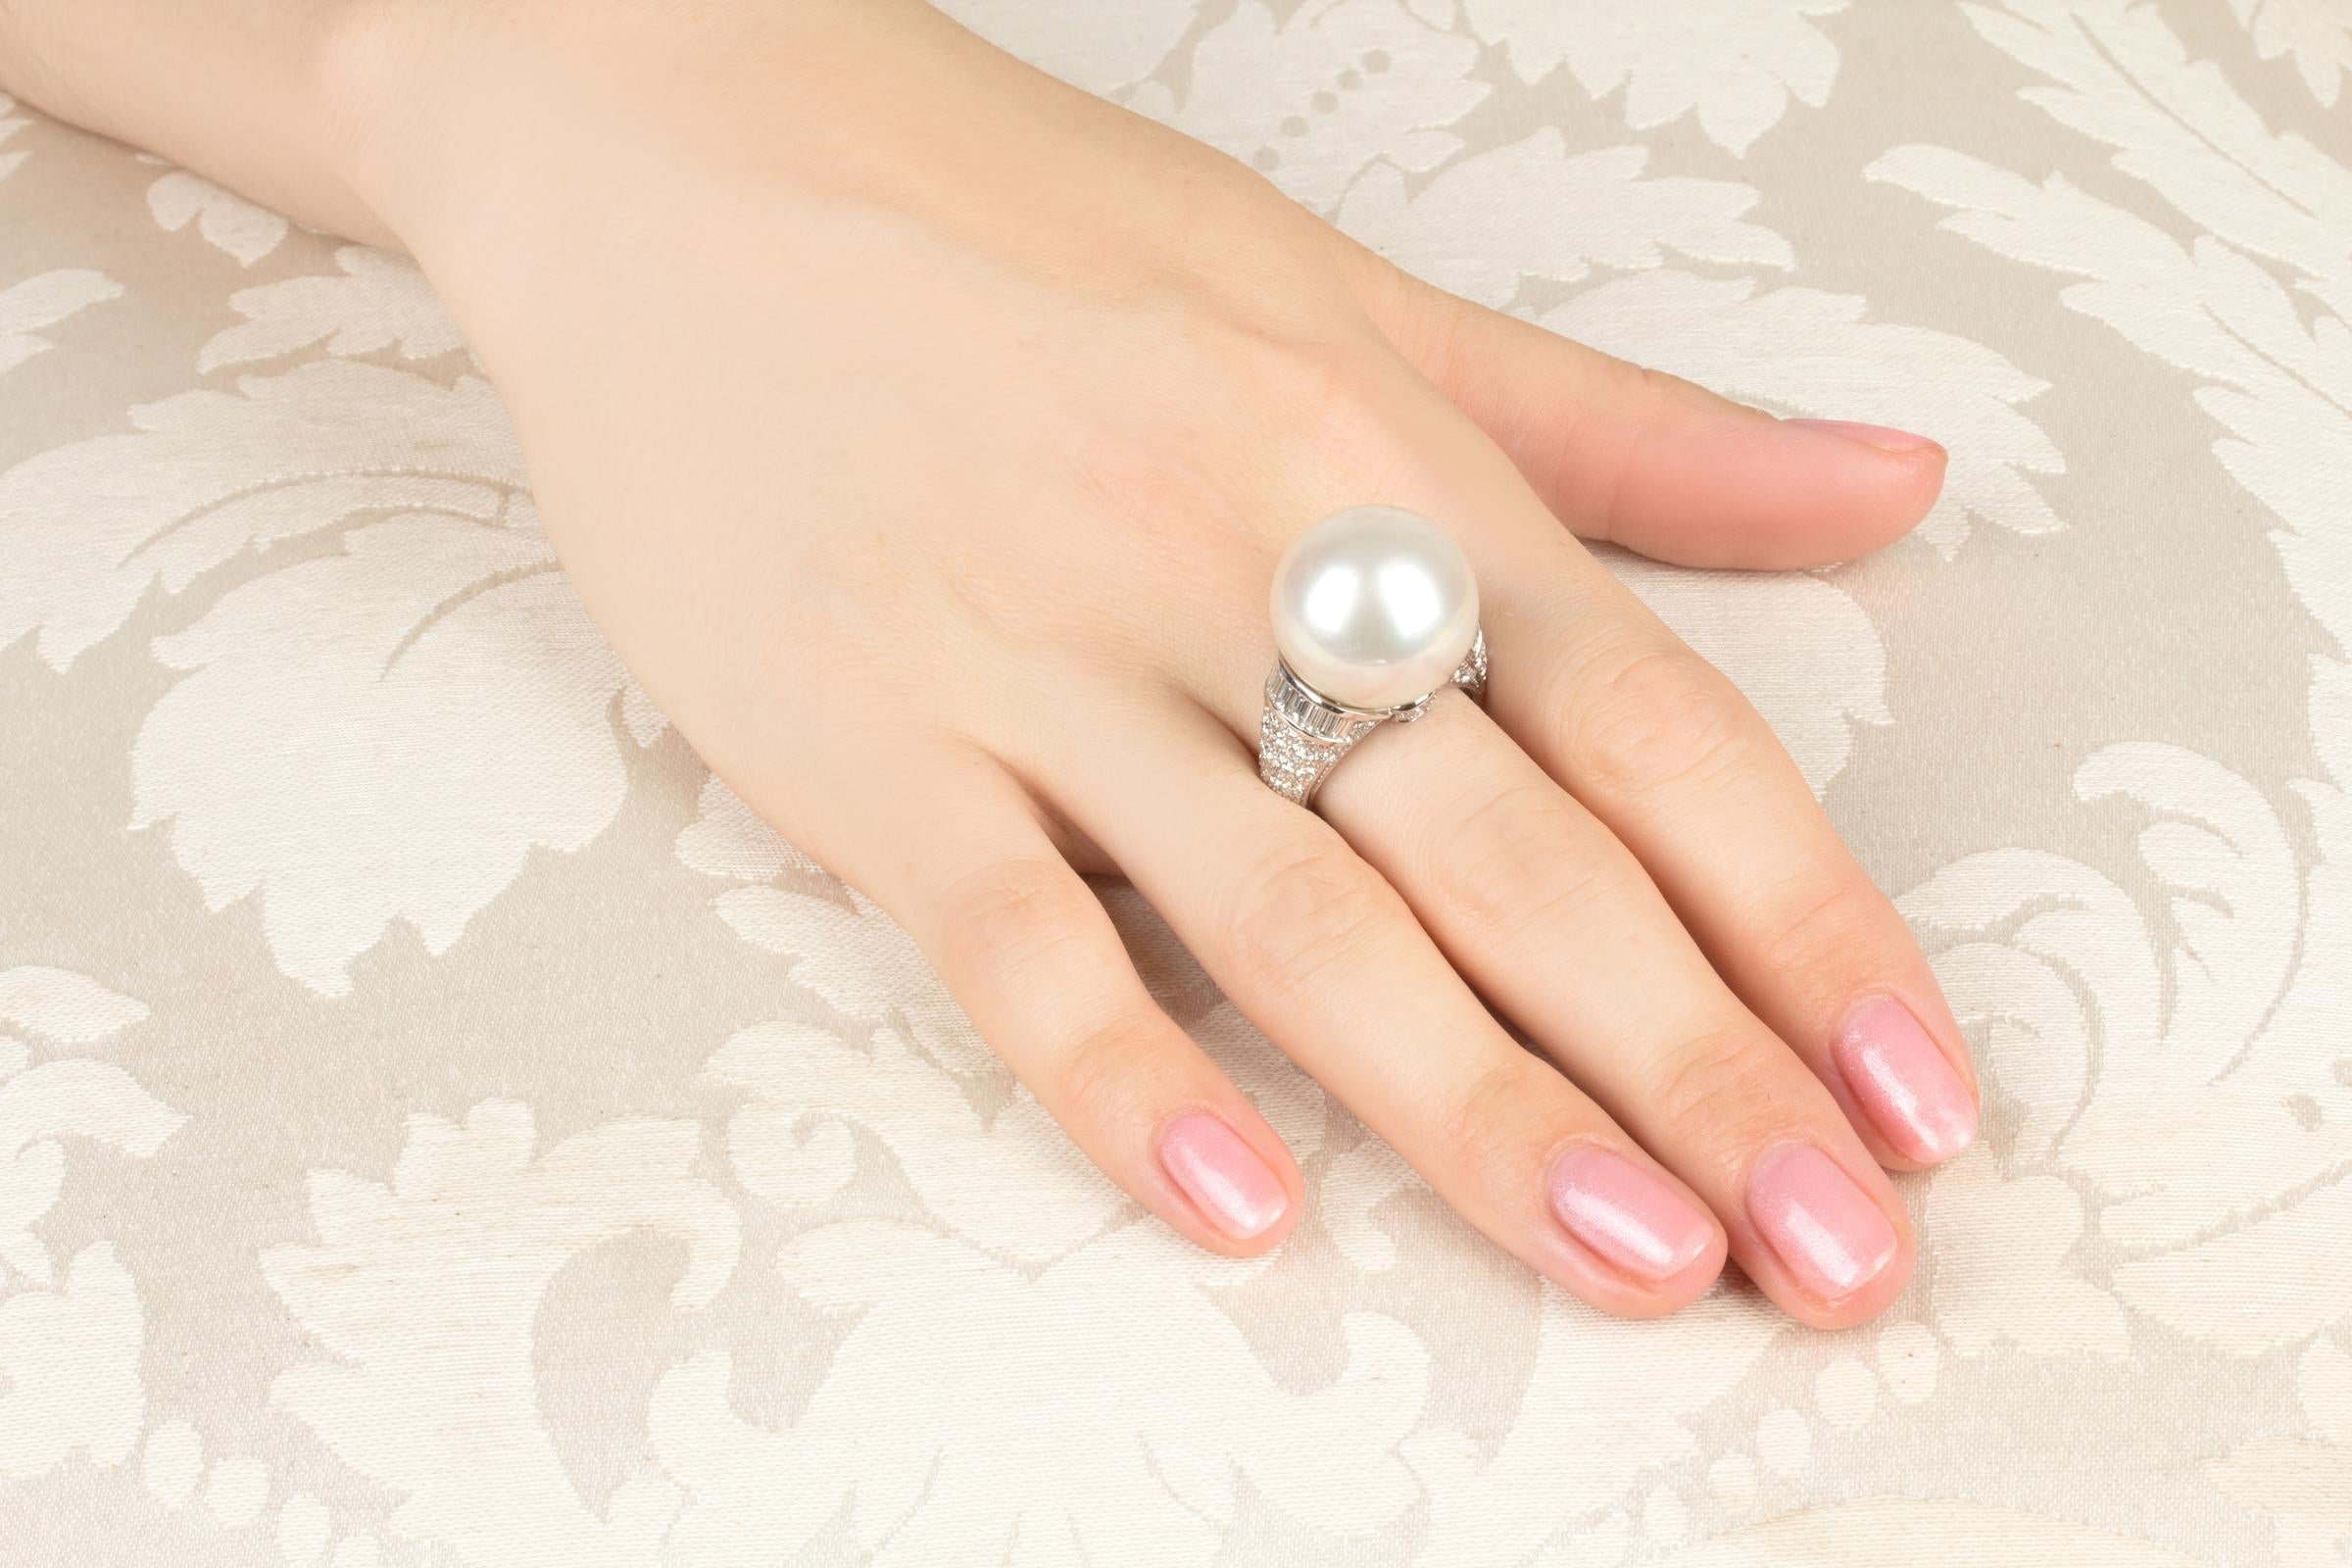 This South Sea pearl and diamond cocktail ring features a voluminous gem quality pearl of 18mm diameter. The pearl is untreated. It displays a fine nacre and its natural color and luster have not been enhanced in any way. The pearl is flanked by